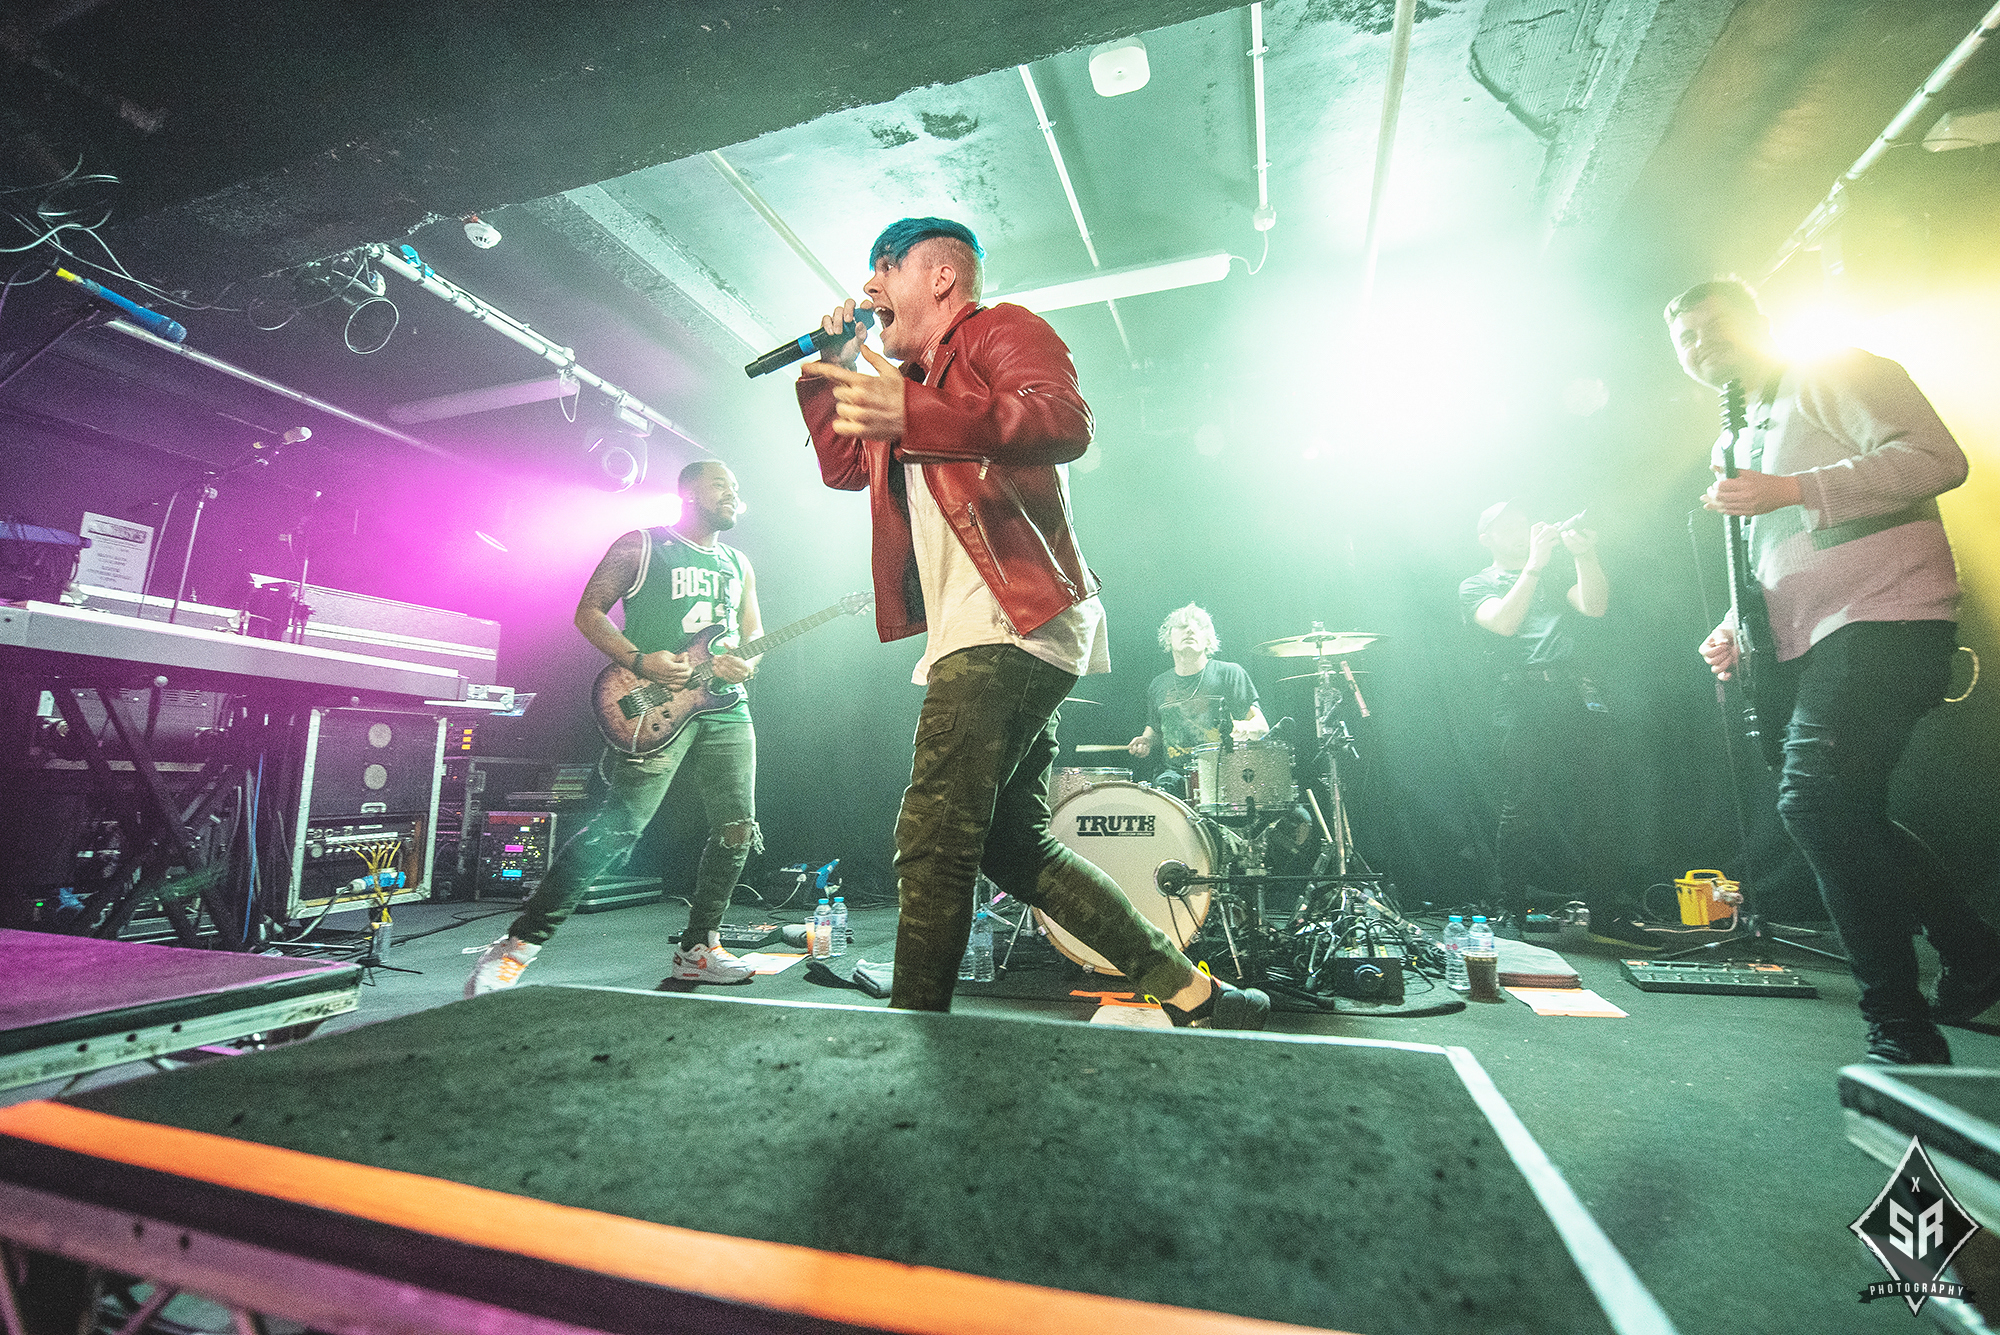 LIVE REVIEW: Set It Off @ Academy 3, Manchester - Distorted Sound